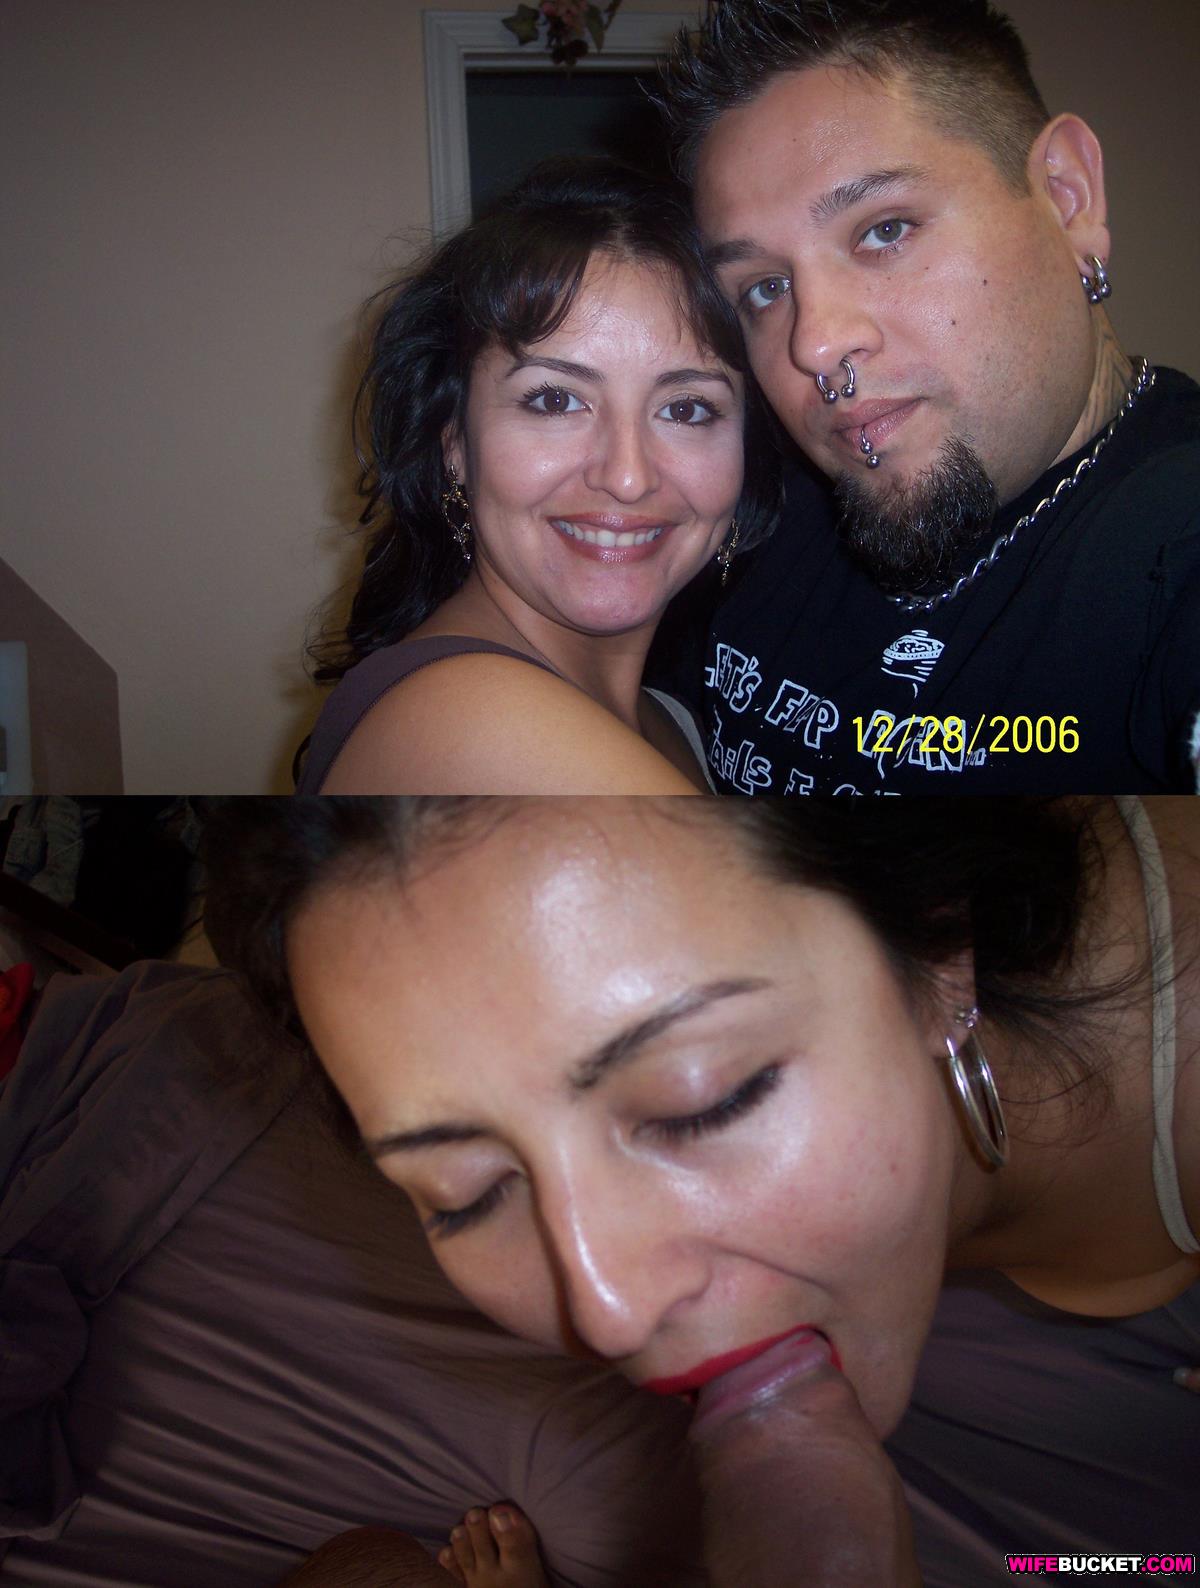 Before After Swinger Sex - 8 Real Before-After Amateur Sex Pics â€“ WifeBucket | Offical MILF Blog